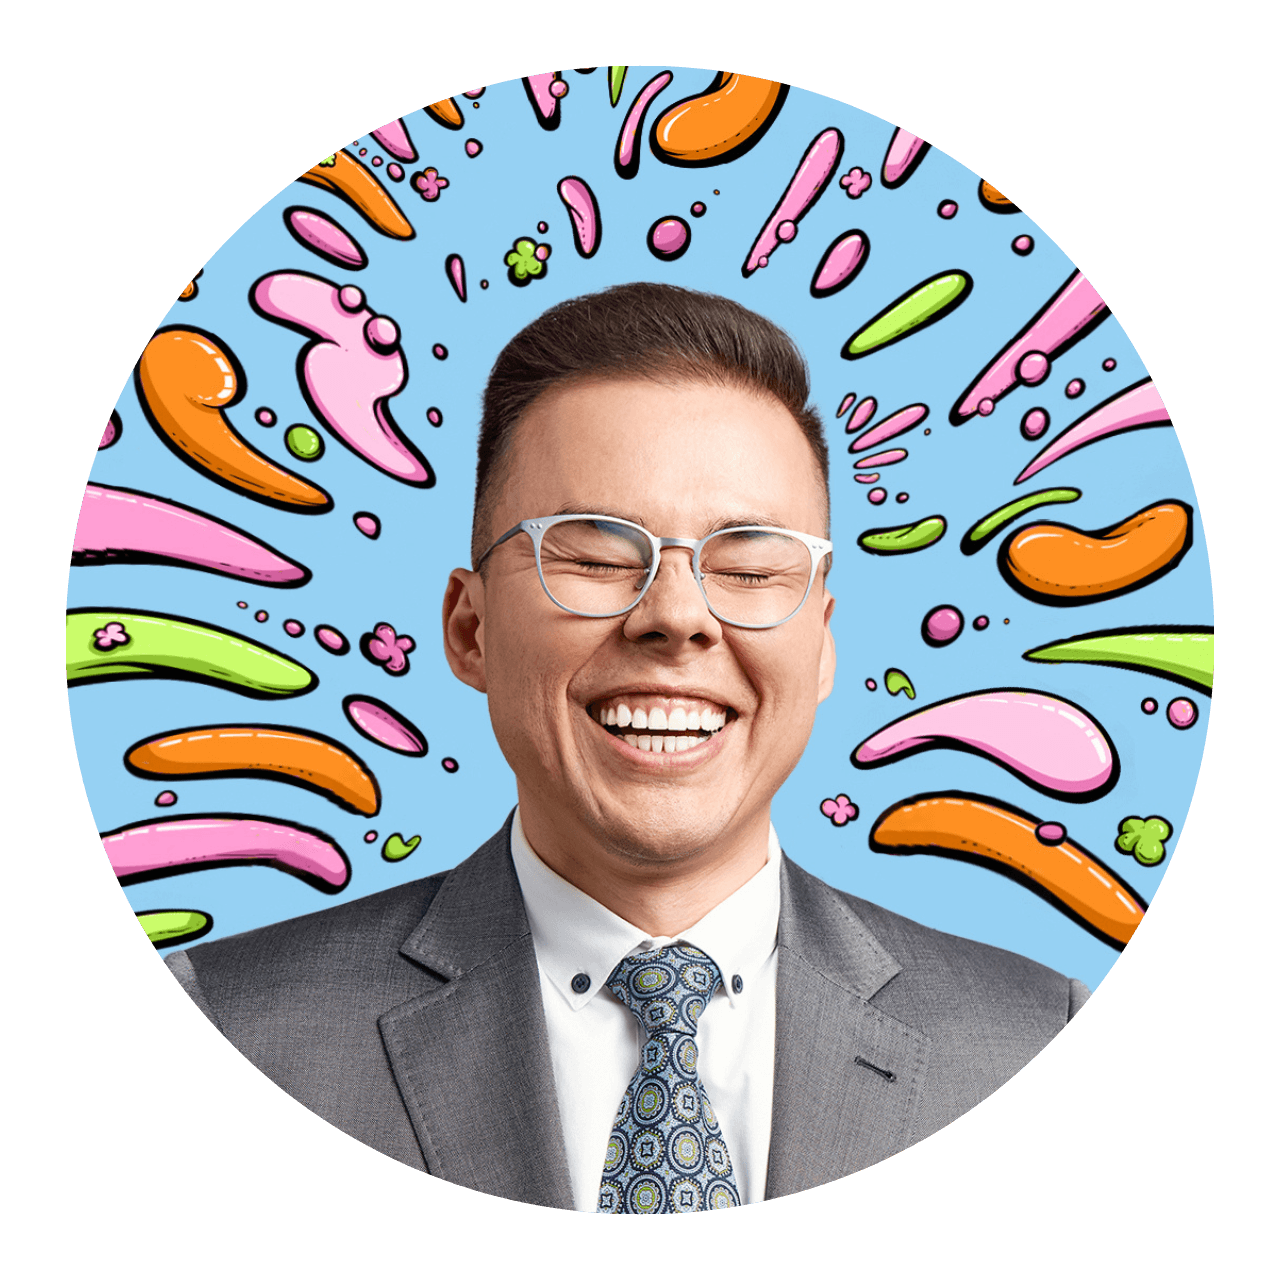 Fun graphic of a man in a suit laughing. He has his eyes closed and is surrounded by bright coloured squiggles against a blue background.